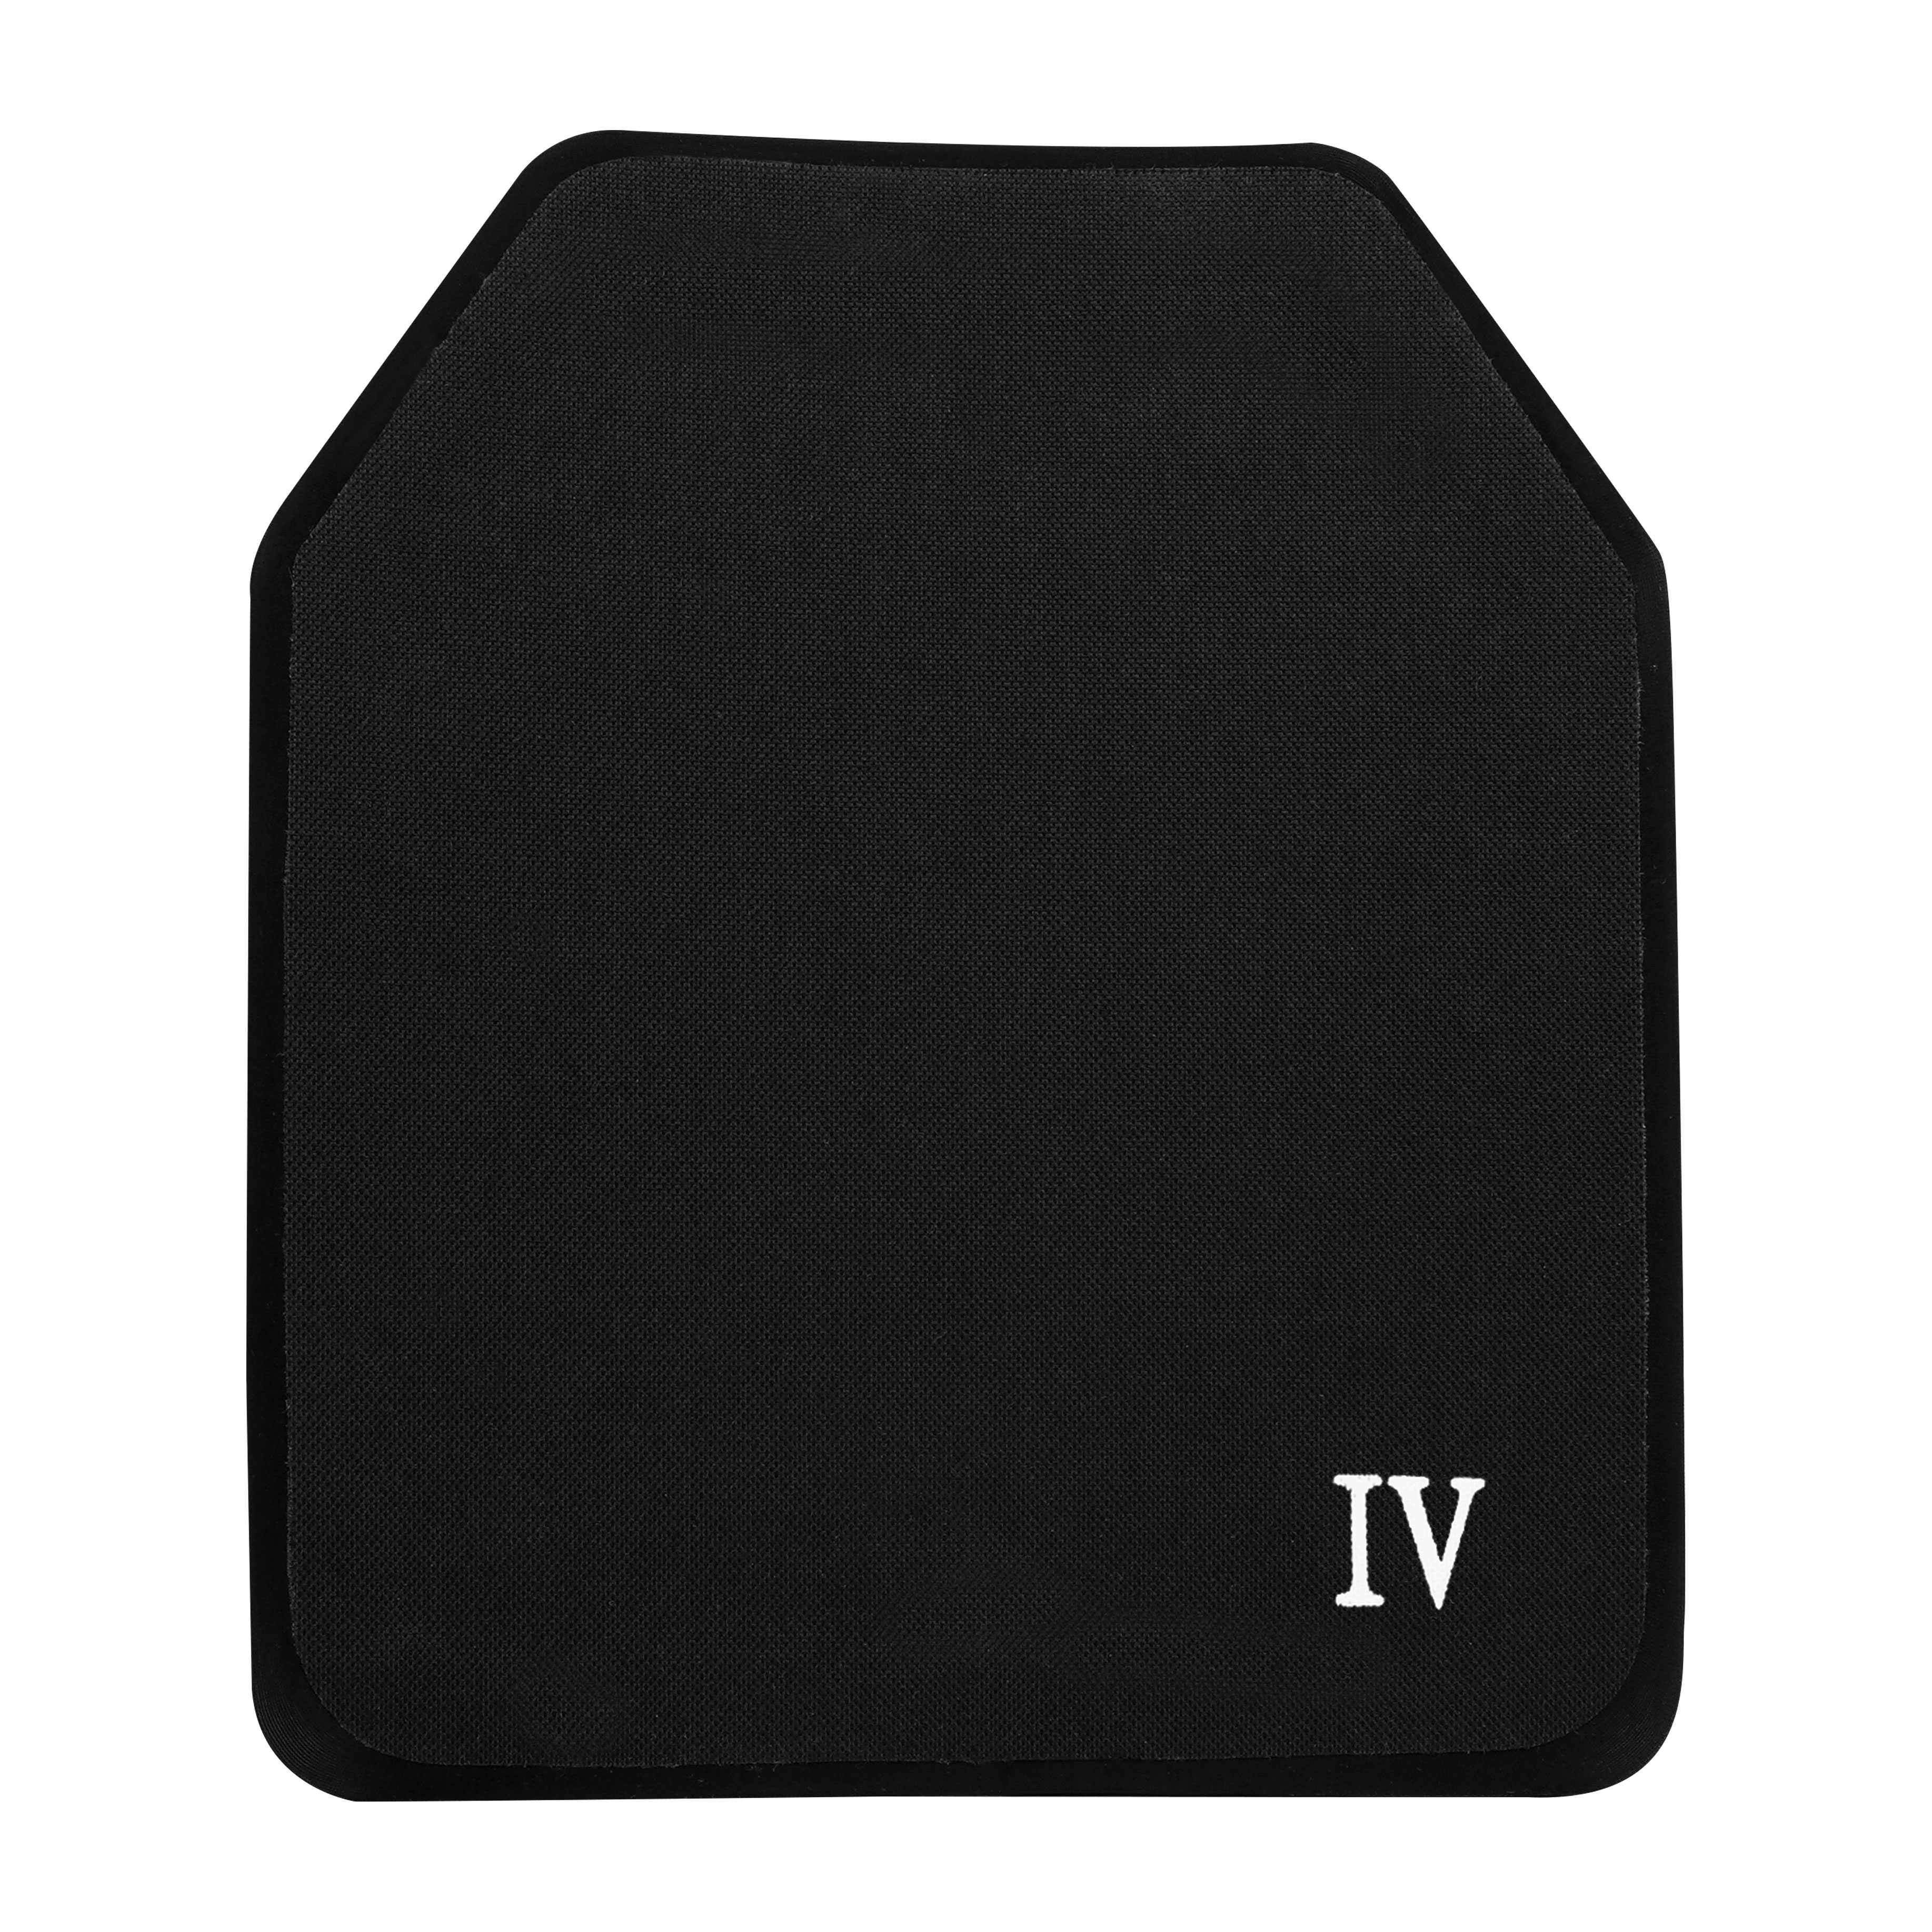 LEVEL 4 armor plate swimming cut plate carrier silicon carbide bulletproof body armor